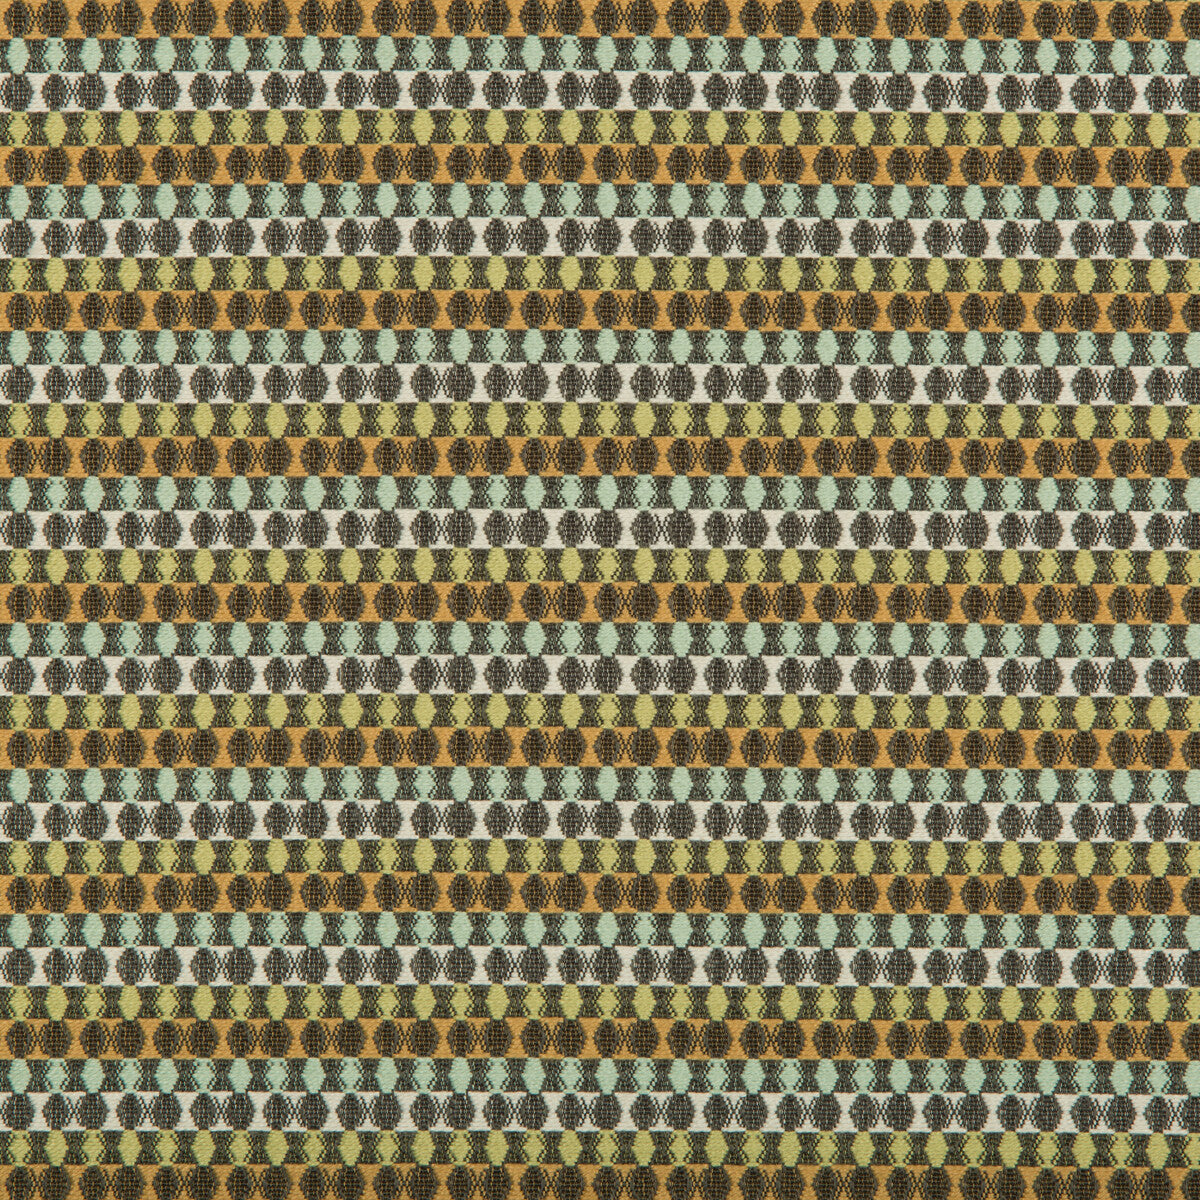 Role Model fabric in hillside color - pattern 35092.23.0 - by Kravet Contract in the Gis Crypton collection